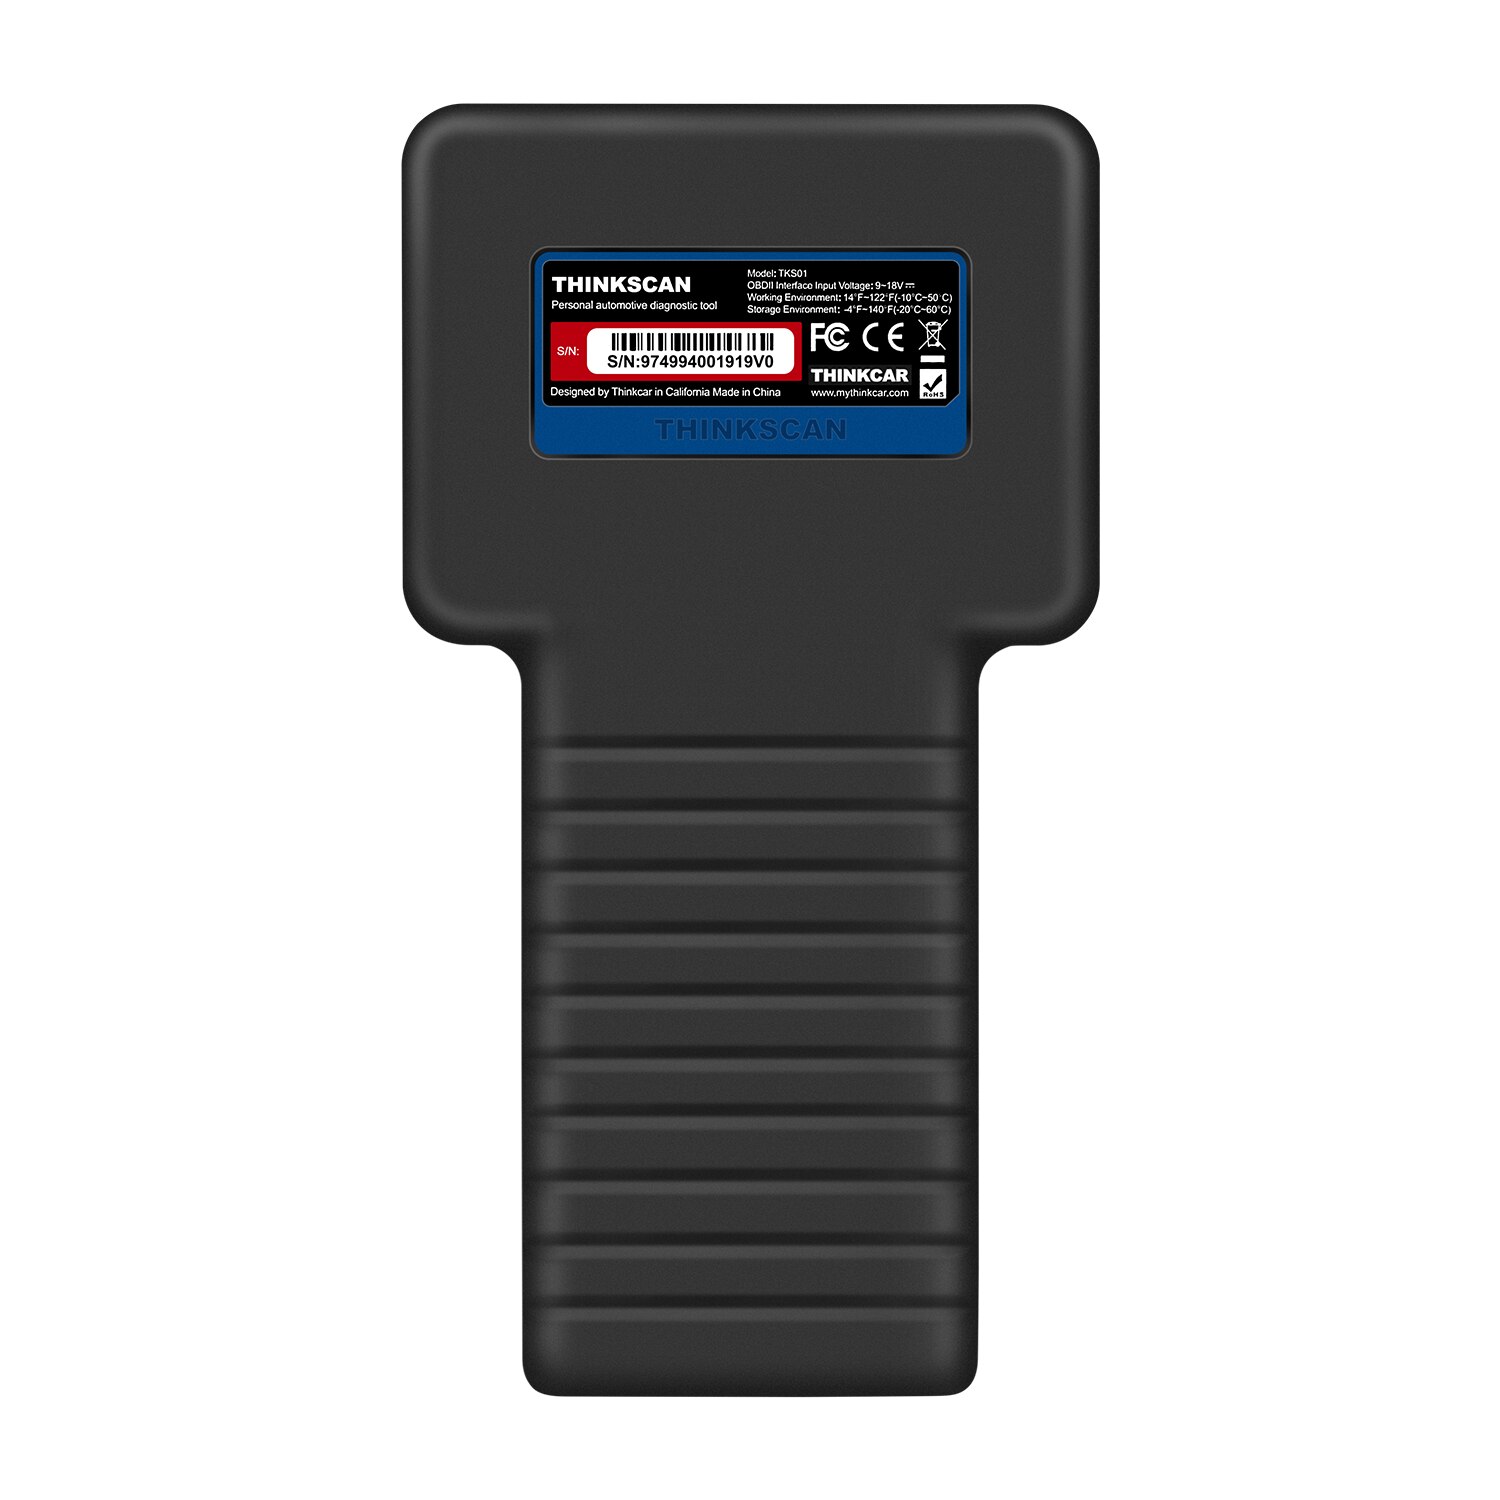 THINKCAR-THINKSCAN-601-Professional-Scanner-Full-OBD2-Car-Diagnostic-Tool-For-Engine-ABS-SRS-Systems-with-Oil-EPB-SAS-TPMS-Reset-1005001731124798